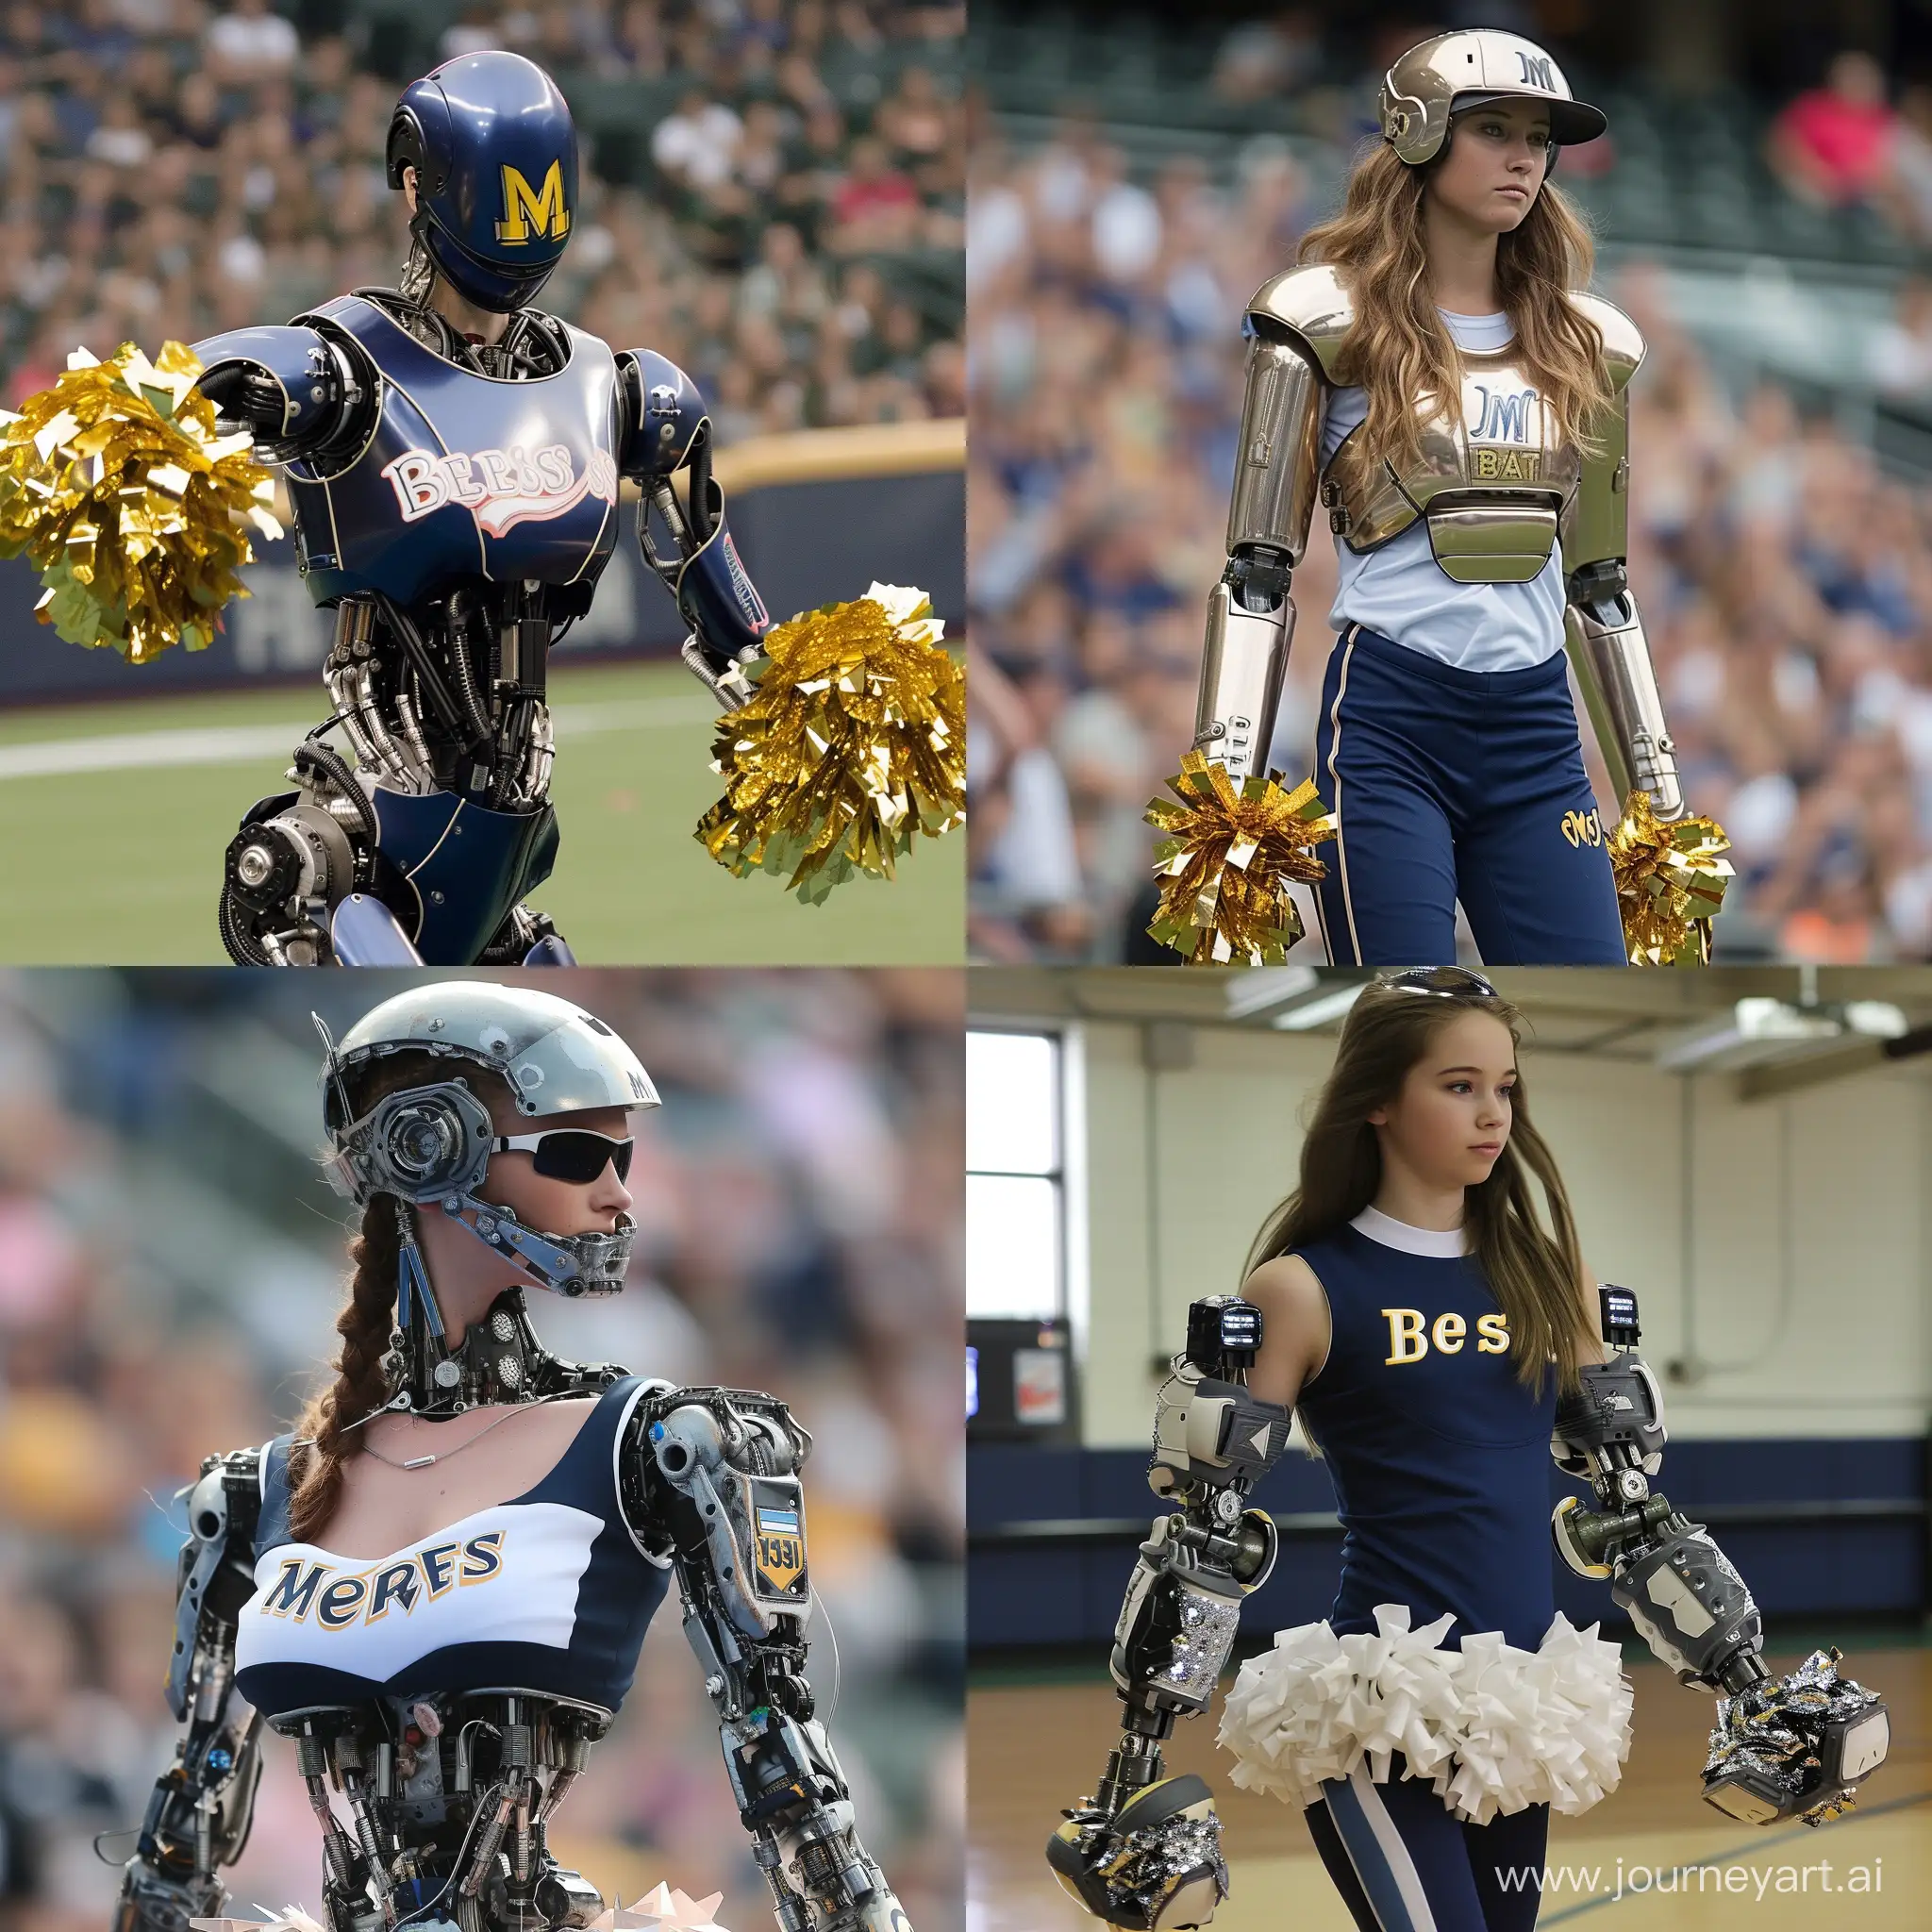 Robot-Malfunction-at-Milwaukee-Brewers-Youth-Cheerleading-Event